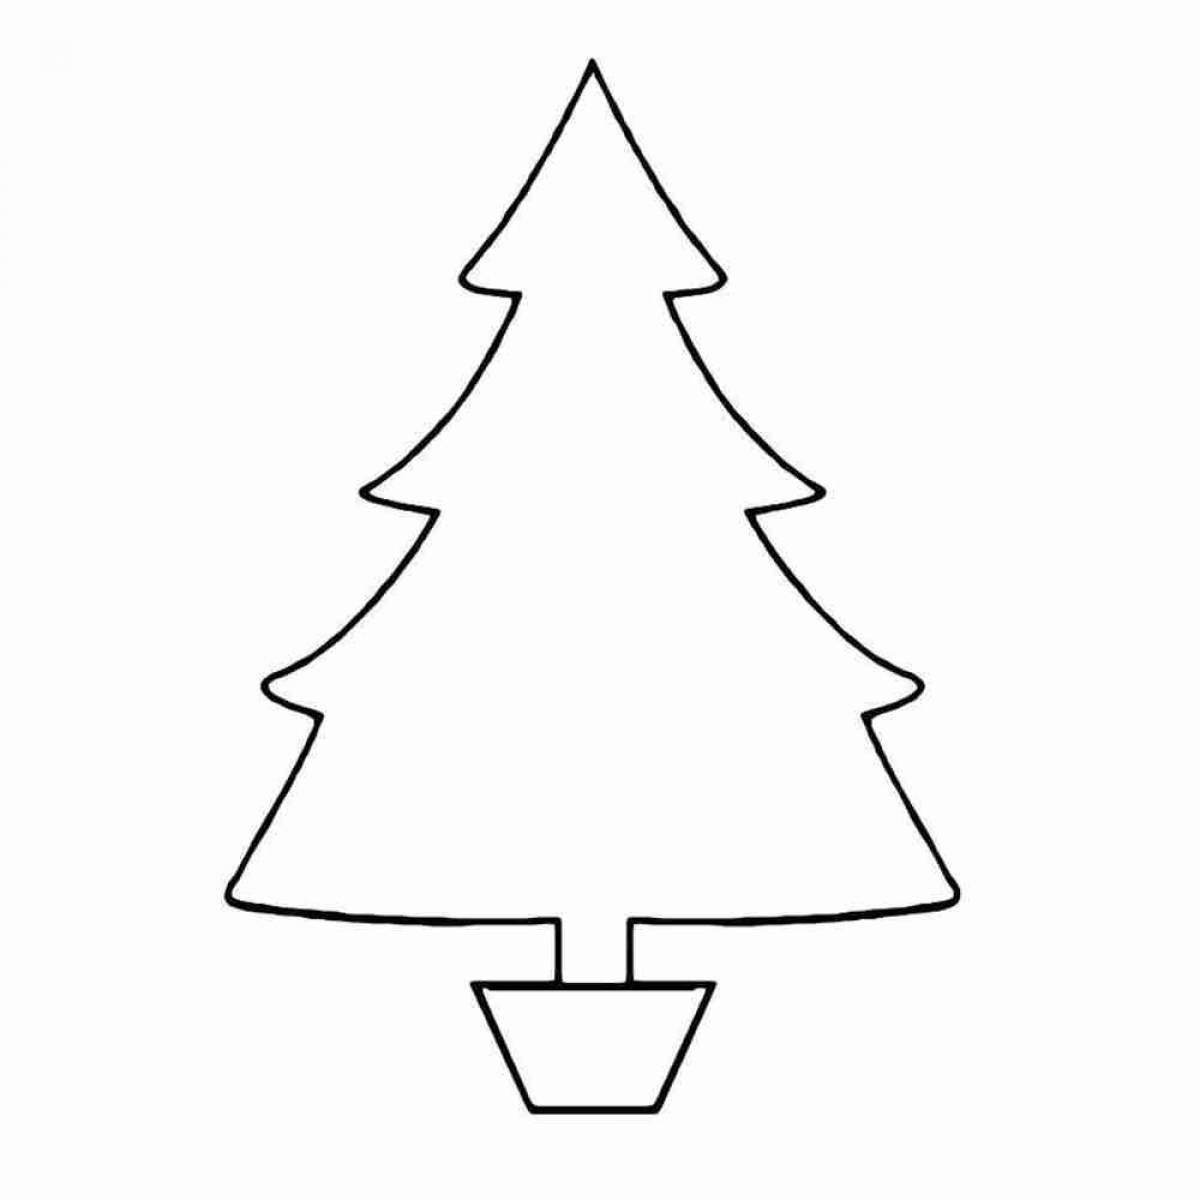 Festive Christmas tree coloring book for toddlers 2-3 years old